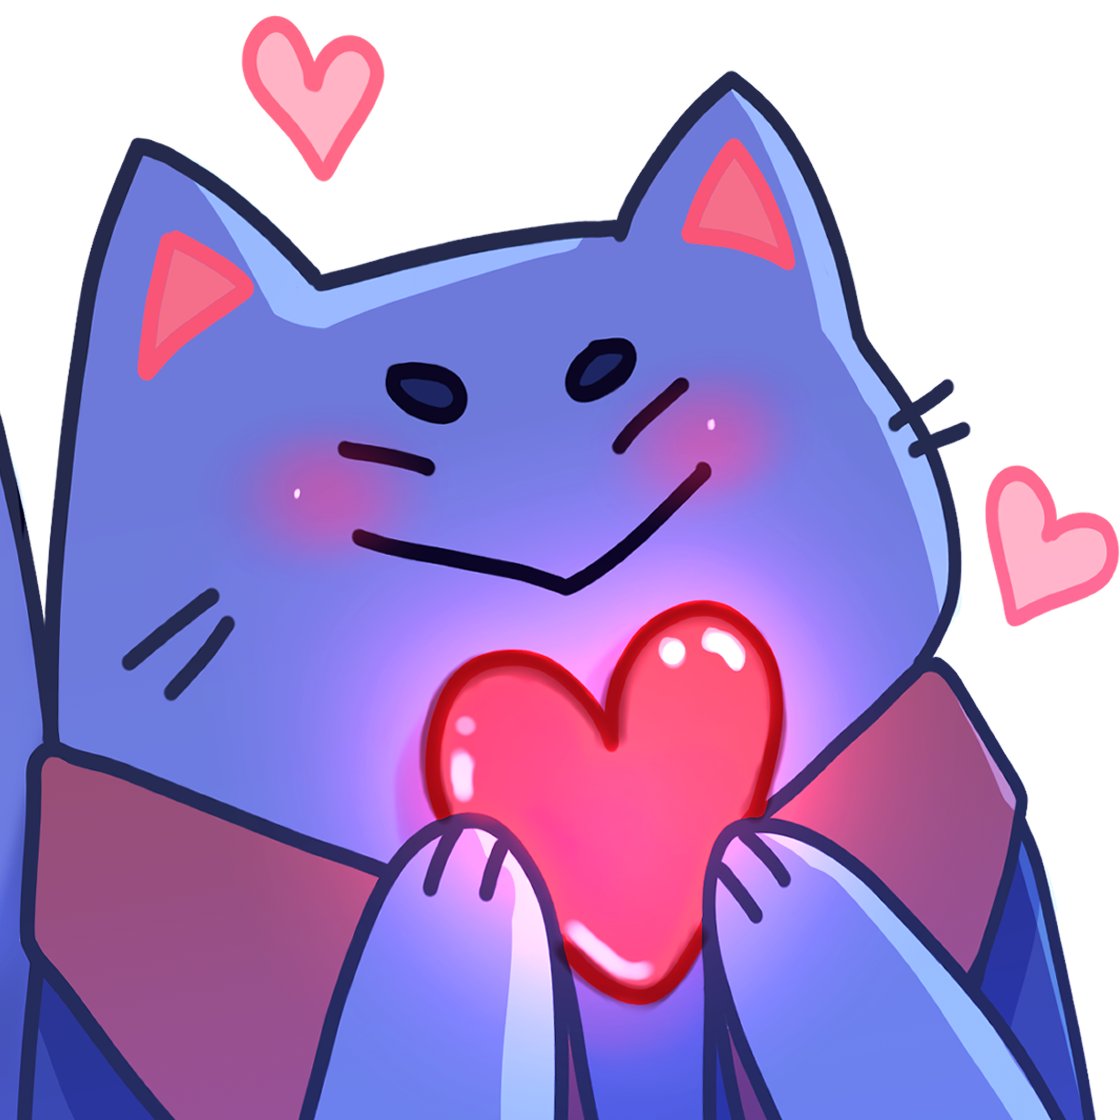 The Firered Nuzlocke is off to a greatstart!
The kind viewers are helping a lot with crowd control~

Thank you to @MayaNekoChan and @FerrumVAtuber for the raids! Thanks also to Beeznuts for the sub and Devon for the 6 gifted subs, sub and MASSIVE bits!

See you next time~😺❤️